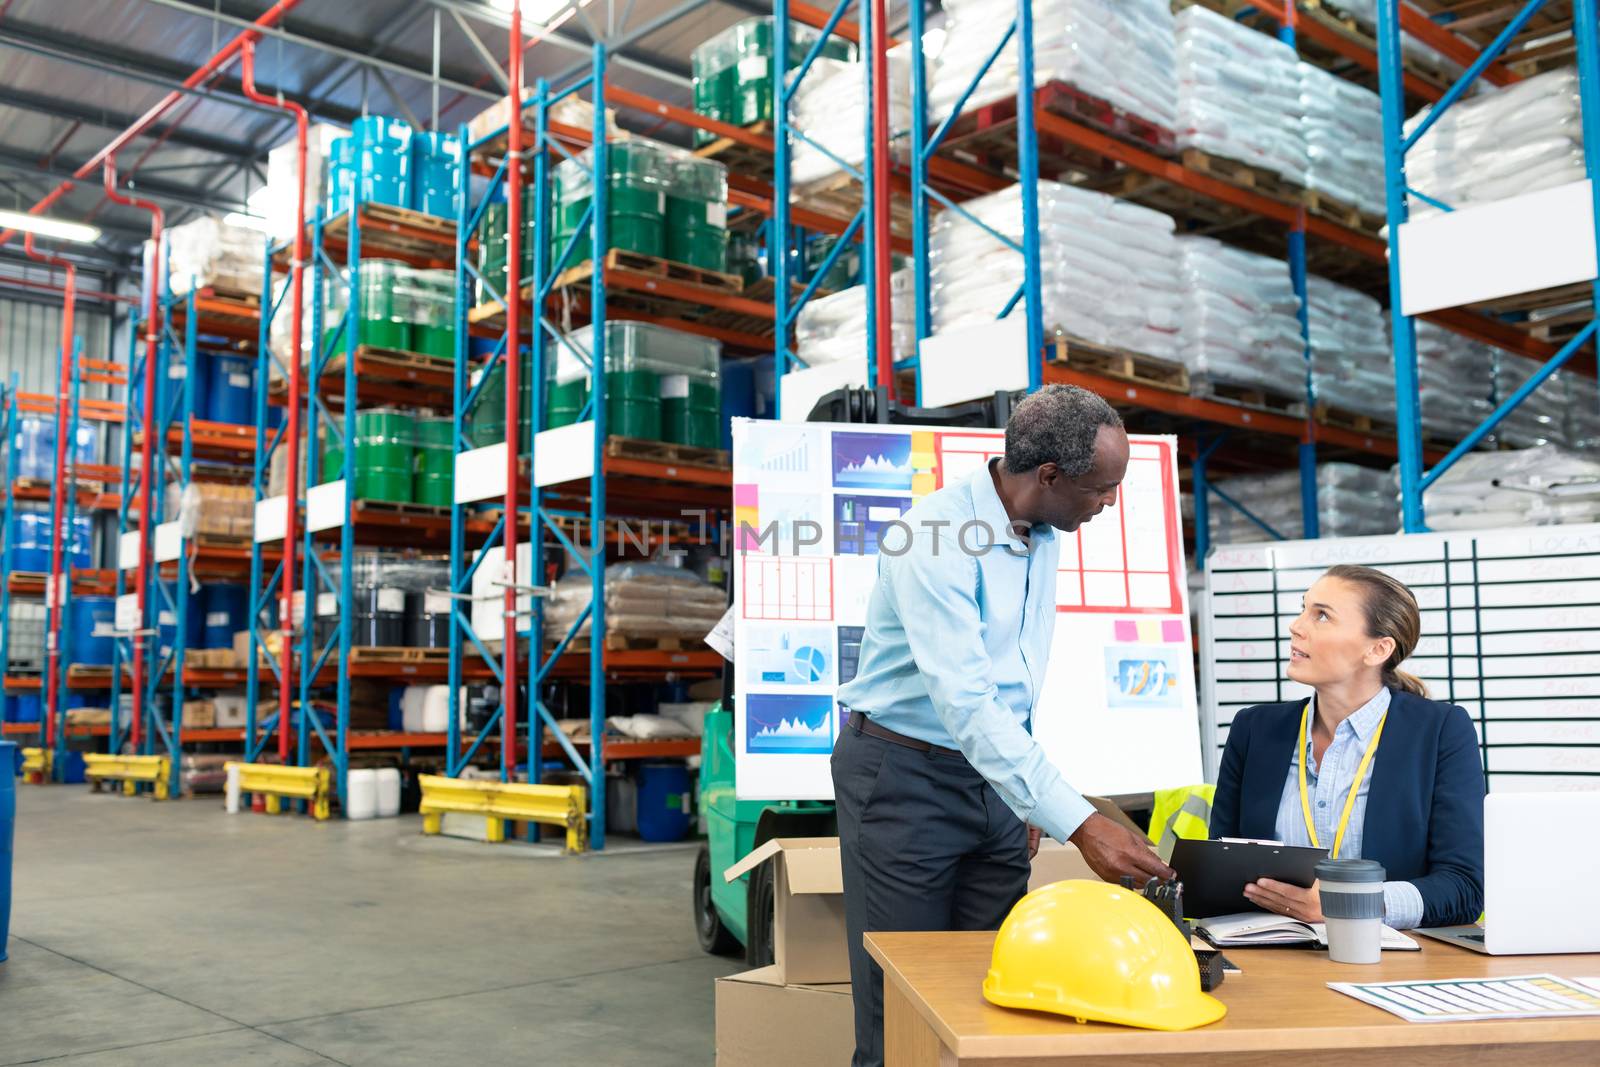 Front view of mature diverse male and female staffs discussing over clipboard at desk in warehouse. This is a freight transportation and distribution warehouse. Industrial and industrial workers concept